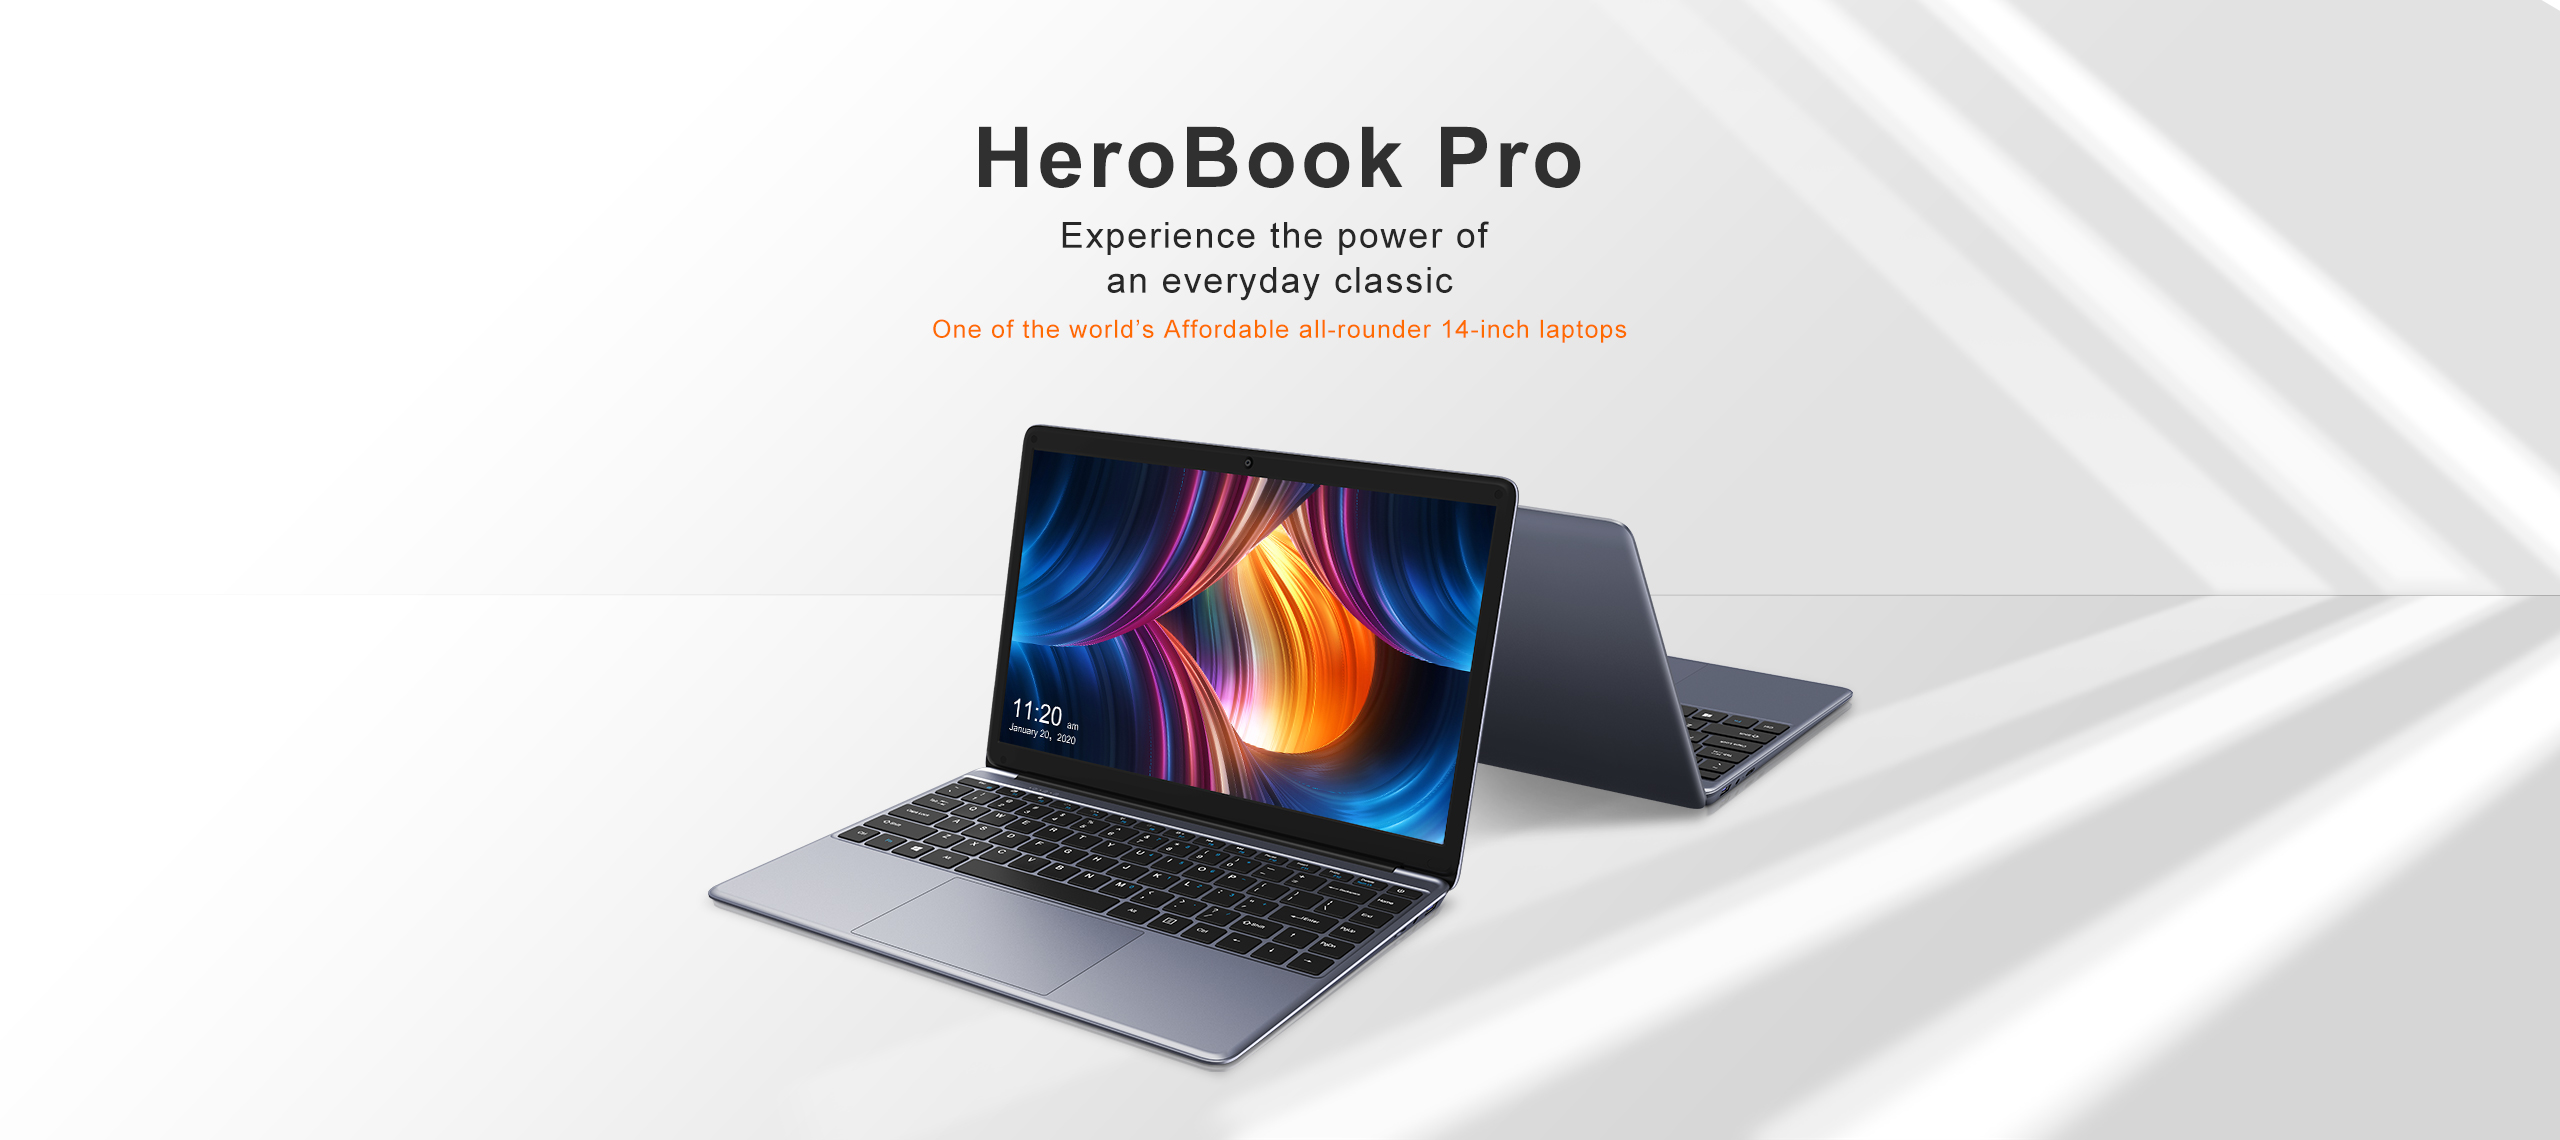 HeroBook Pro - Chuwi Official -Laptop, Android/Windows Tablet PC 